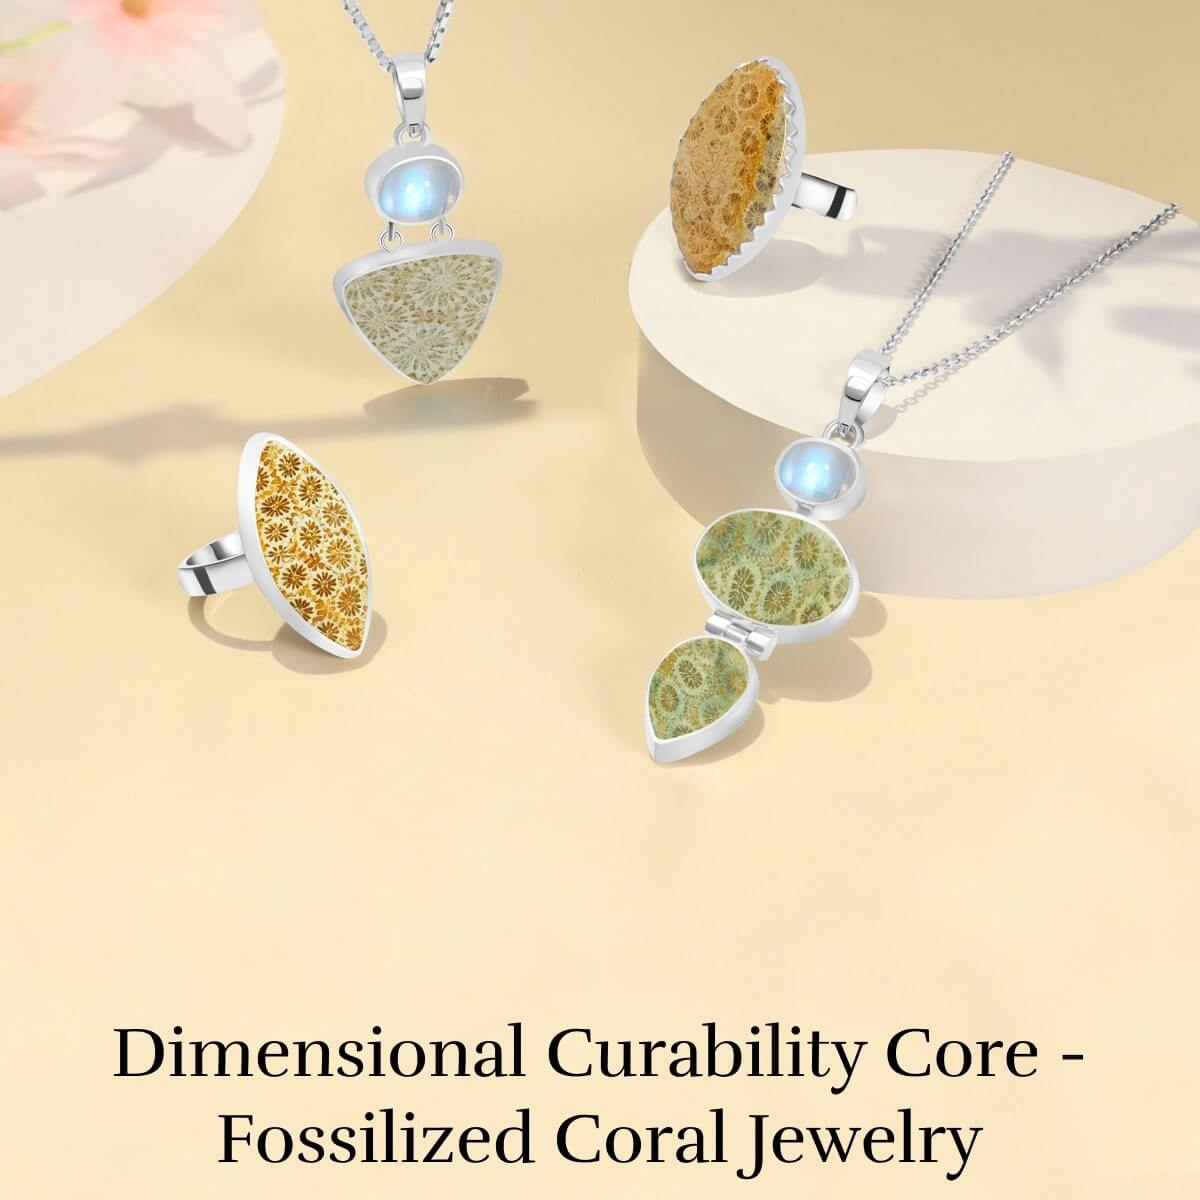 Fossilized Coral Jewelry